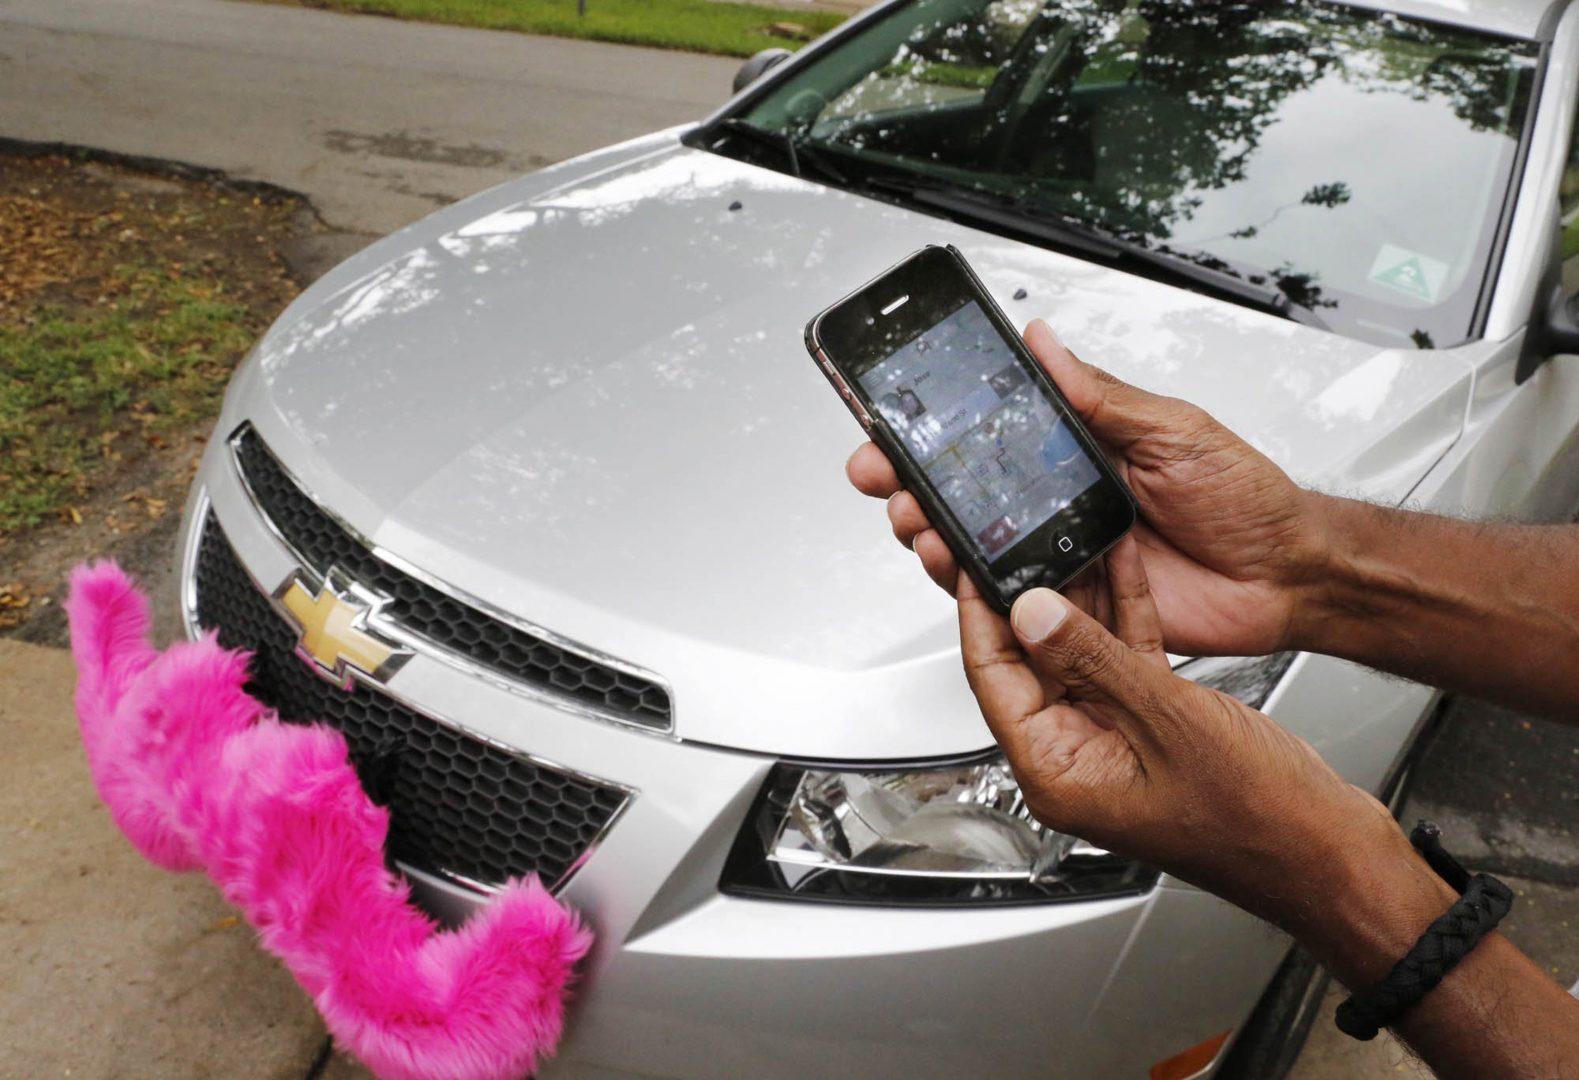 Lyft is offering half-off rides to polling stations on Nov. 6, 2018. (Jose A. Iglesias/Miami Herald/TNS)